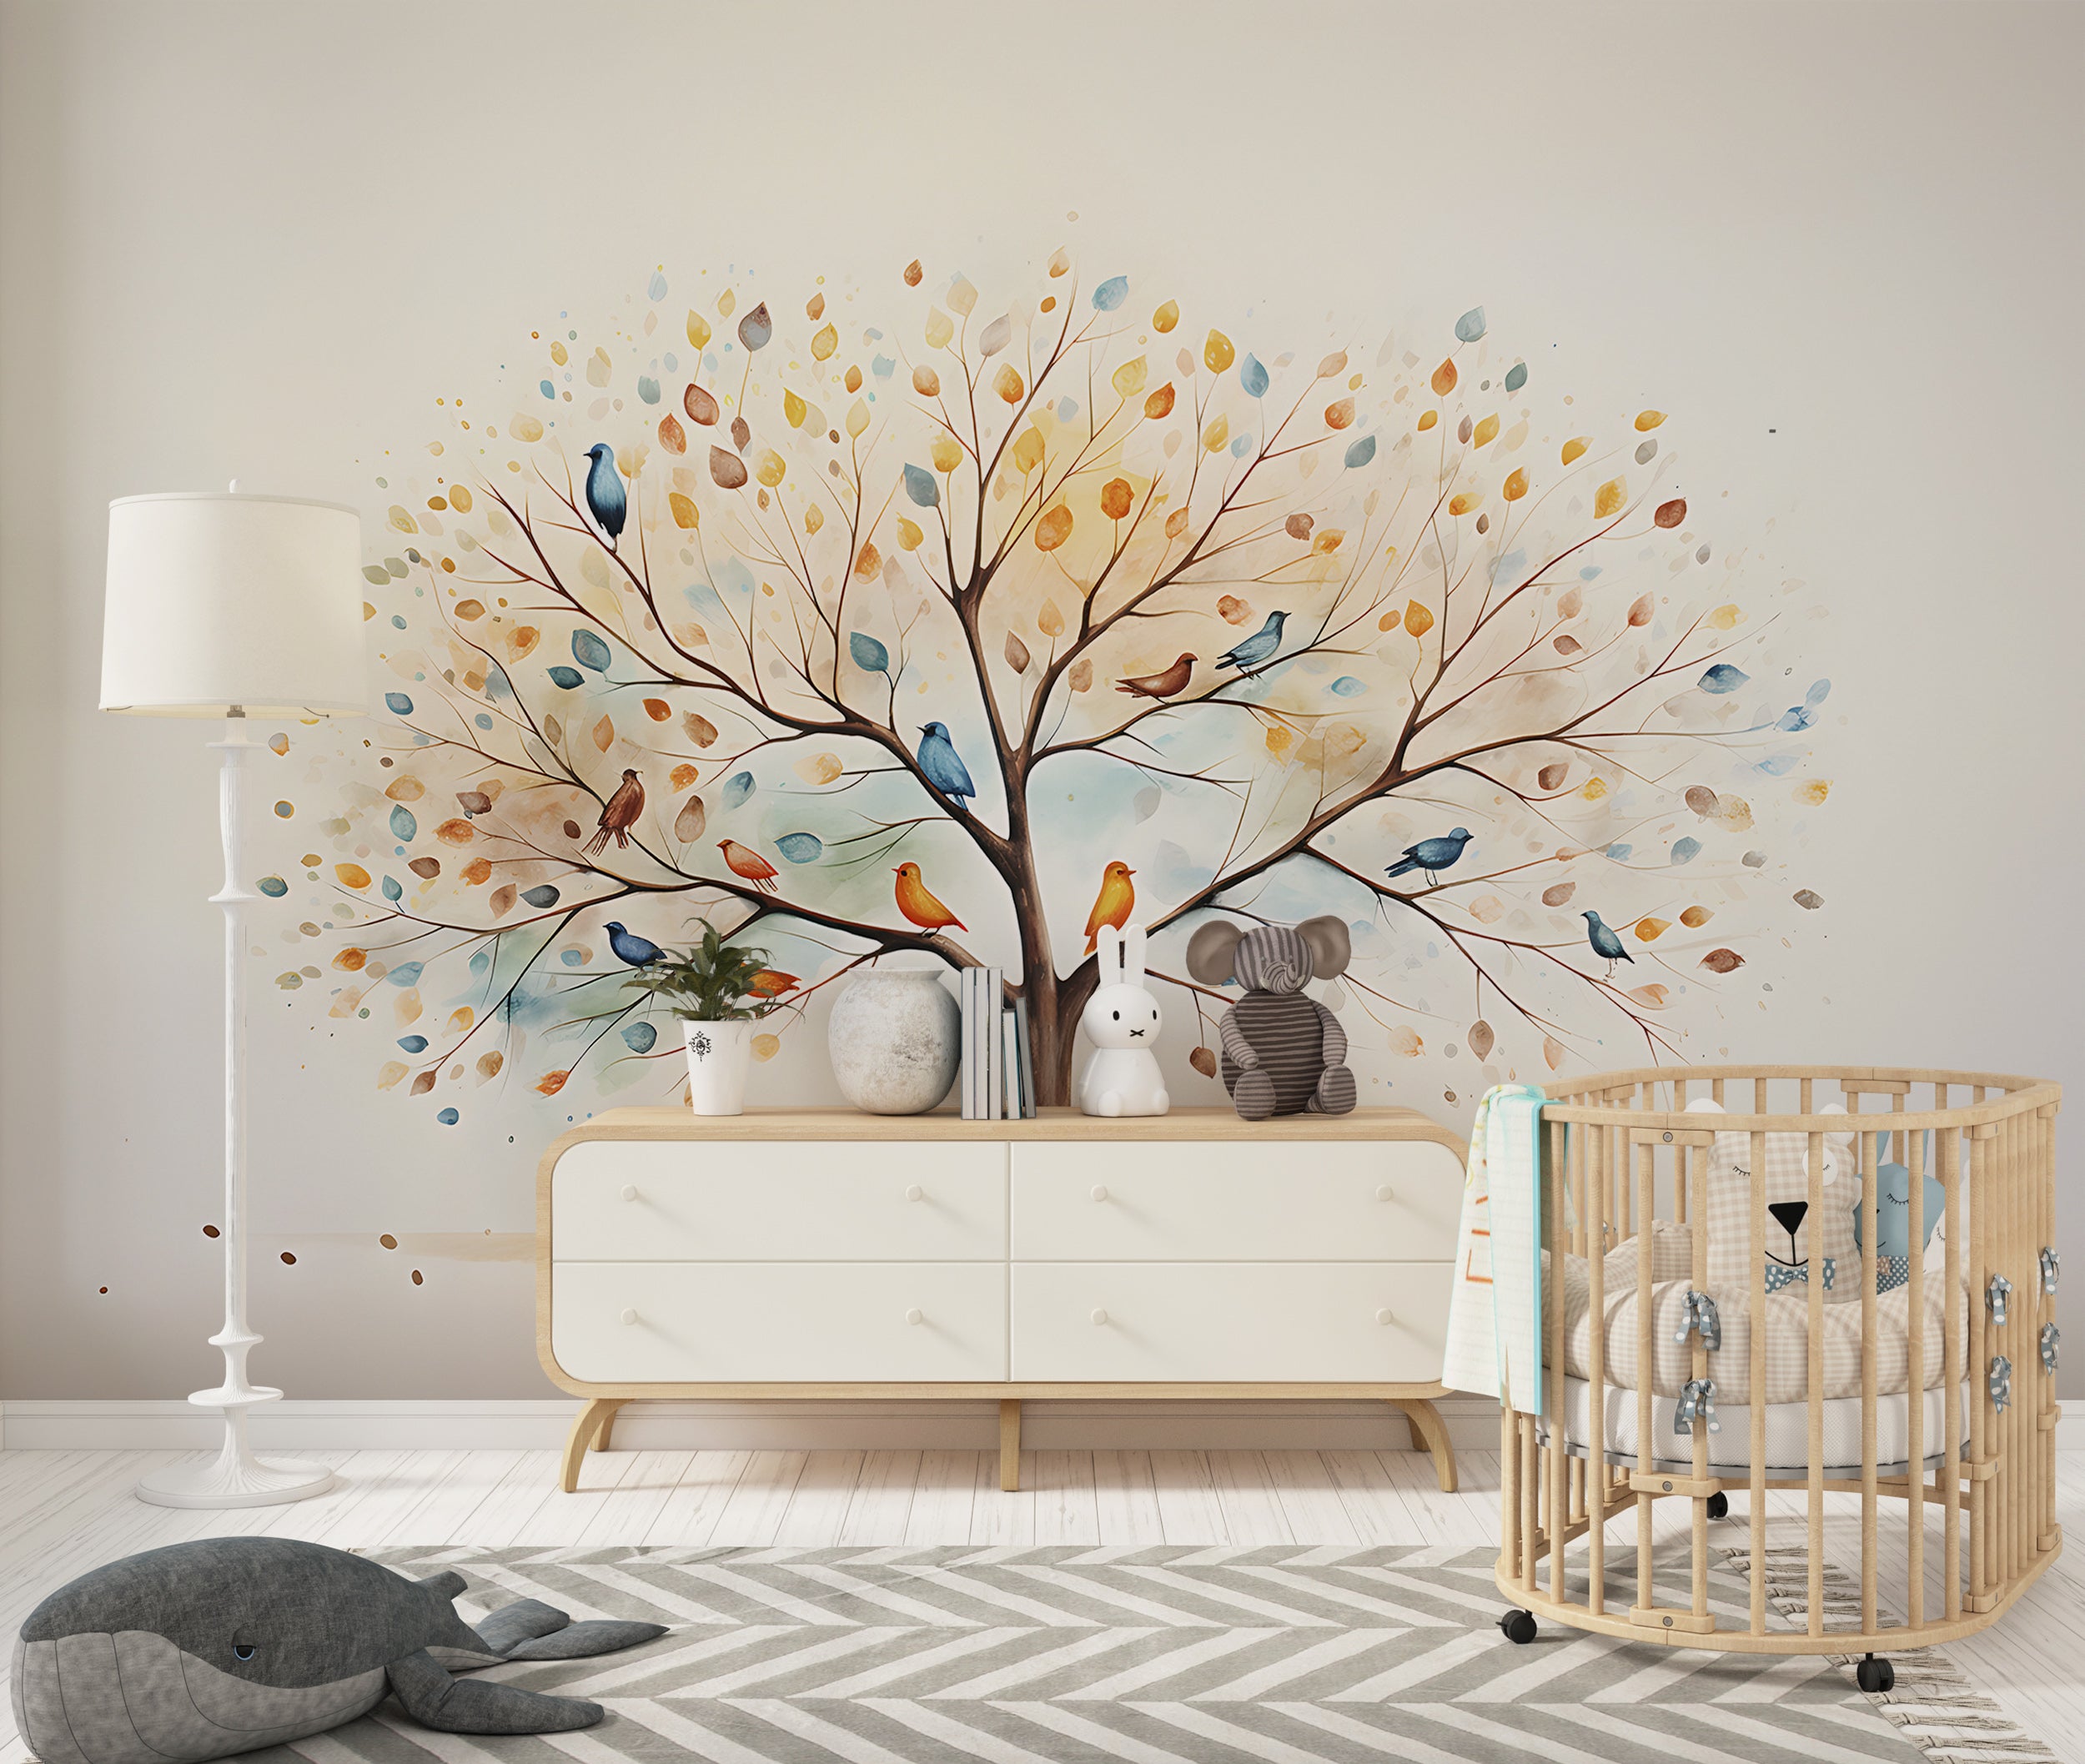 Playful Birds and Leaves Wall Decoration